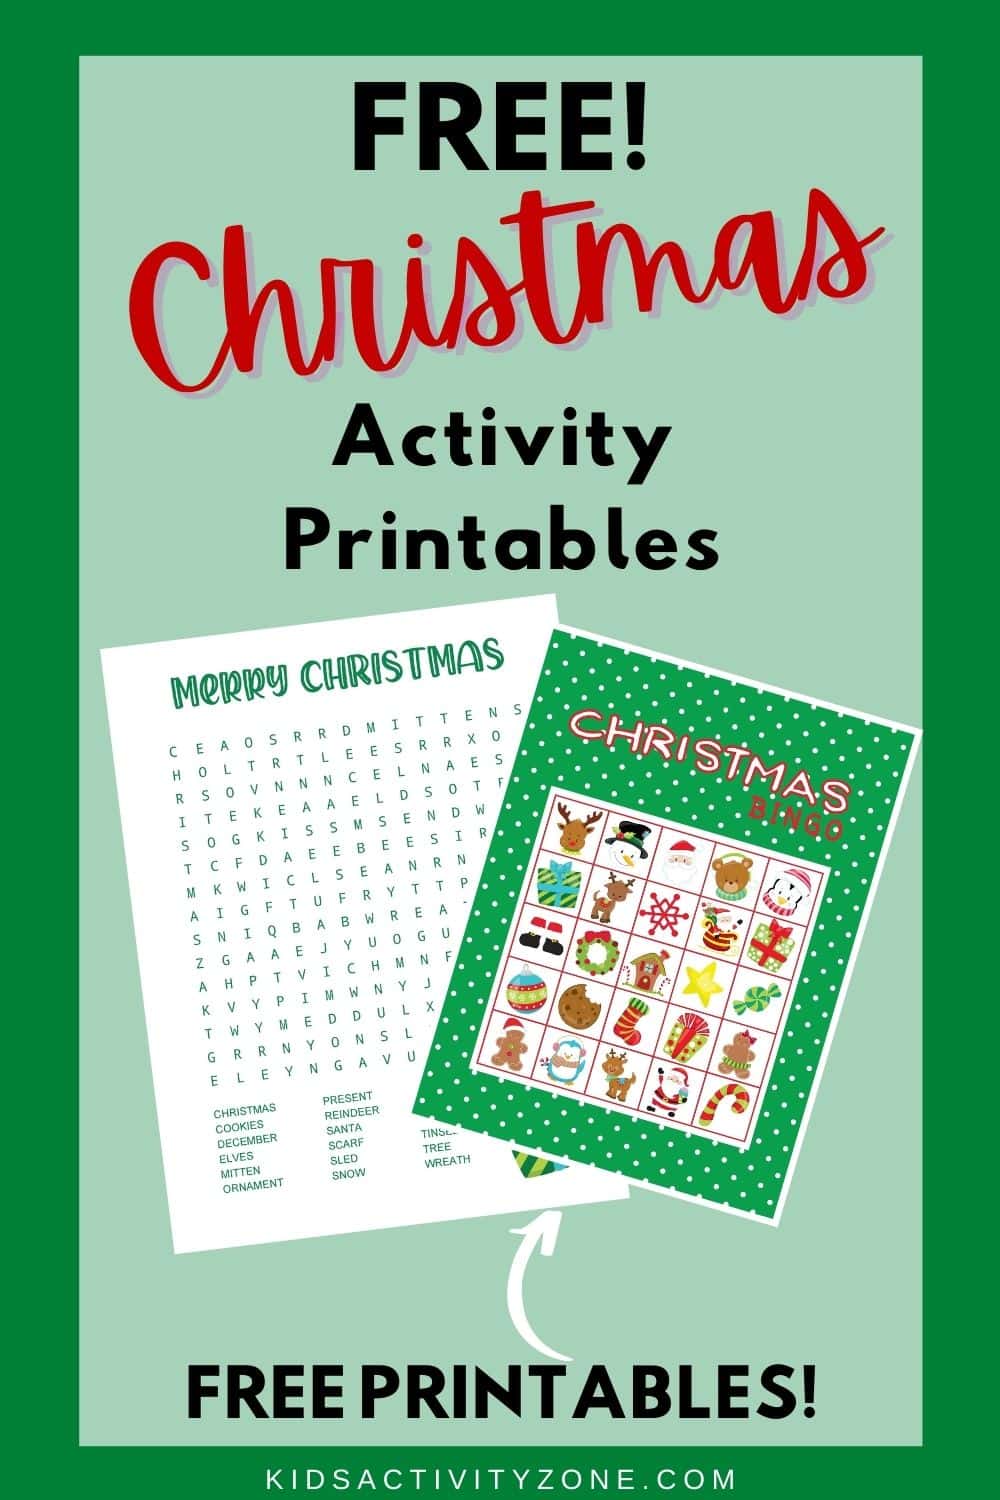 Free Christmas Activities Printables are perfect for any holiday party. You can use them in your classroom, during a gather, after Christmas dinner and more! There's an activity for everyone like Christmas Bingo, Sukoku, Word Search, Coloring pages and more!